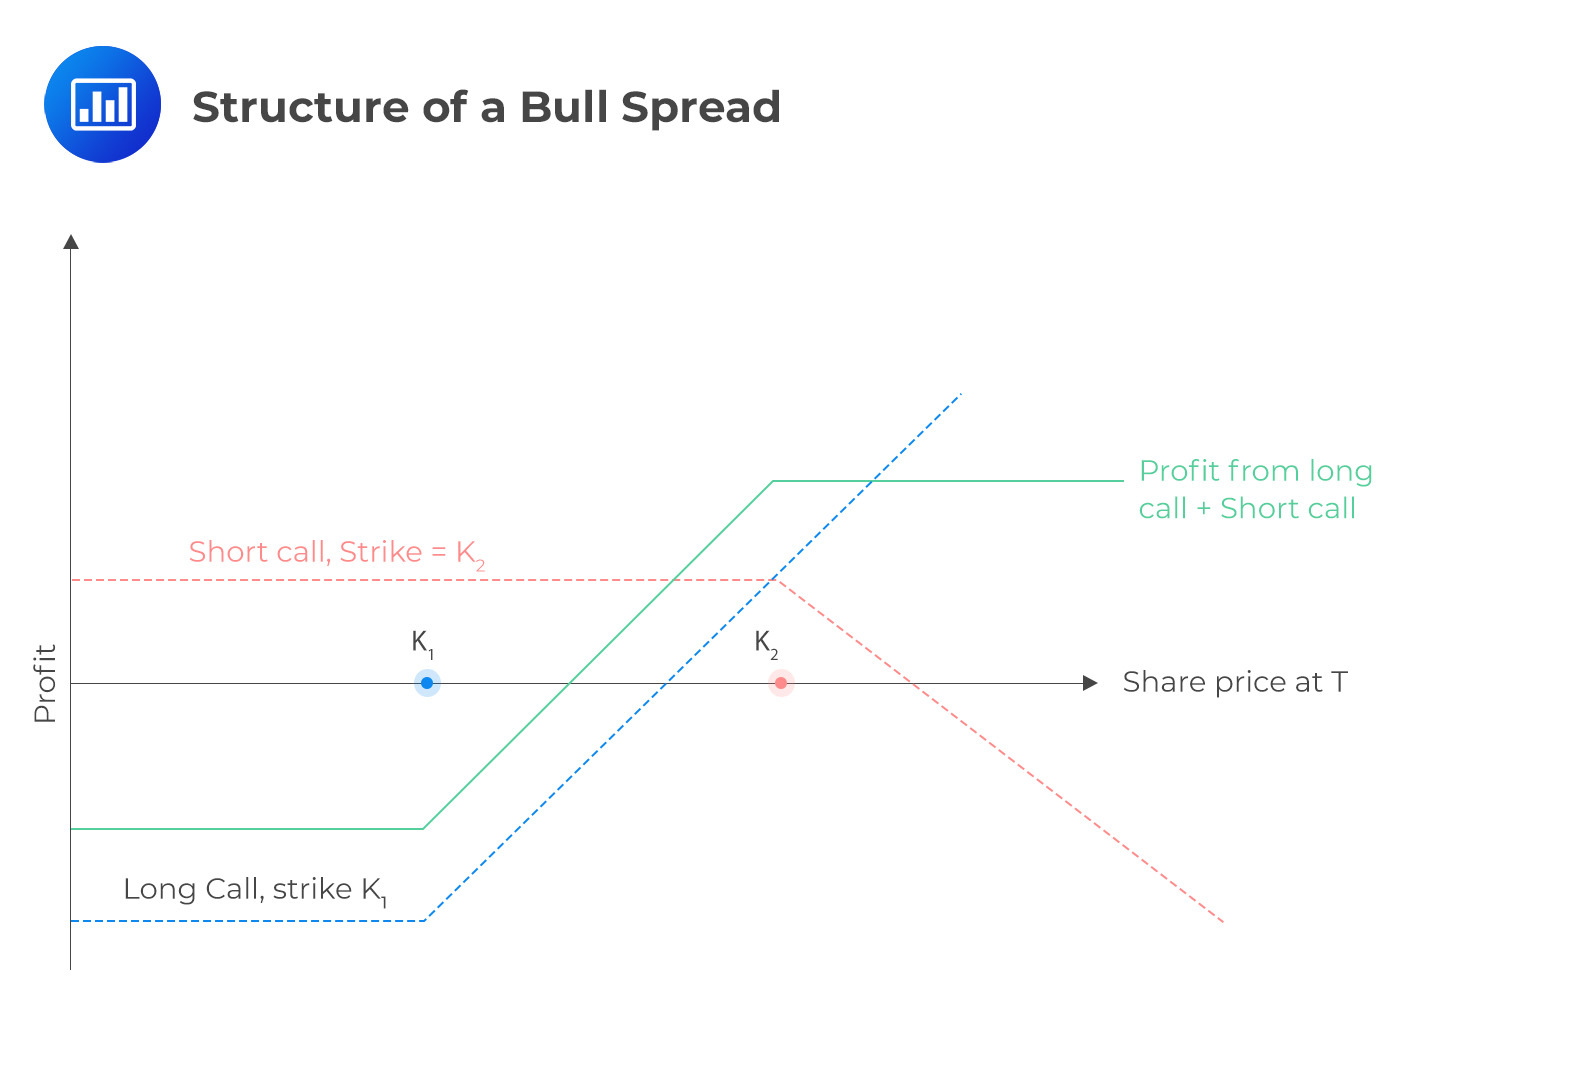 Structure of a bull spread